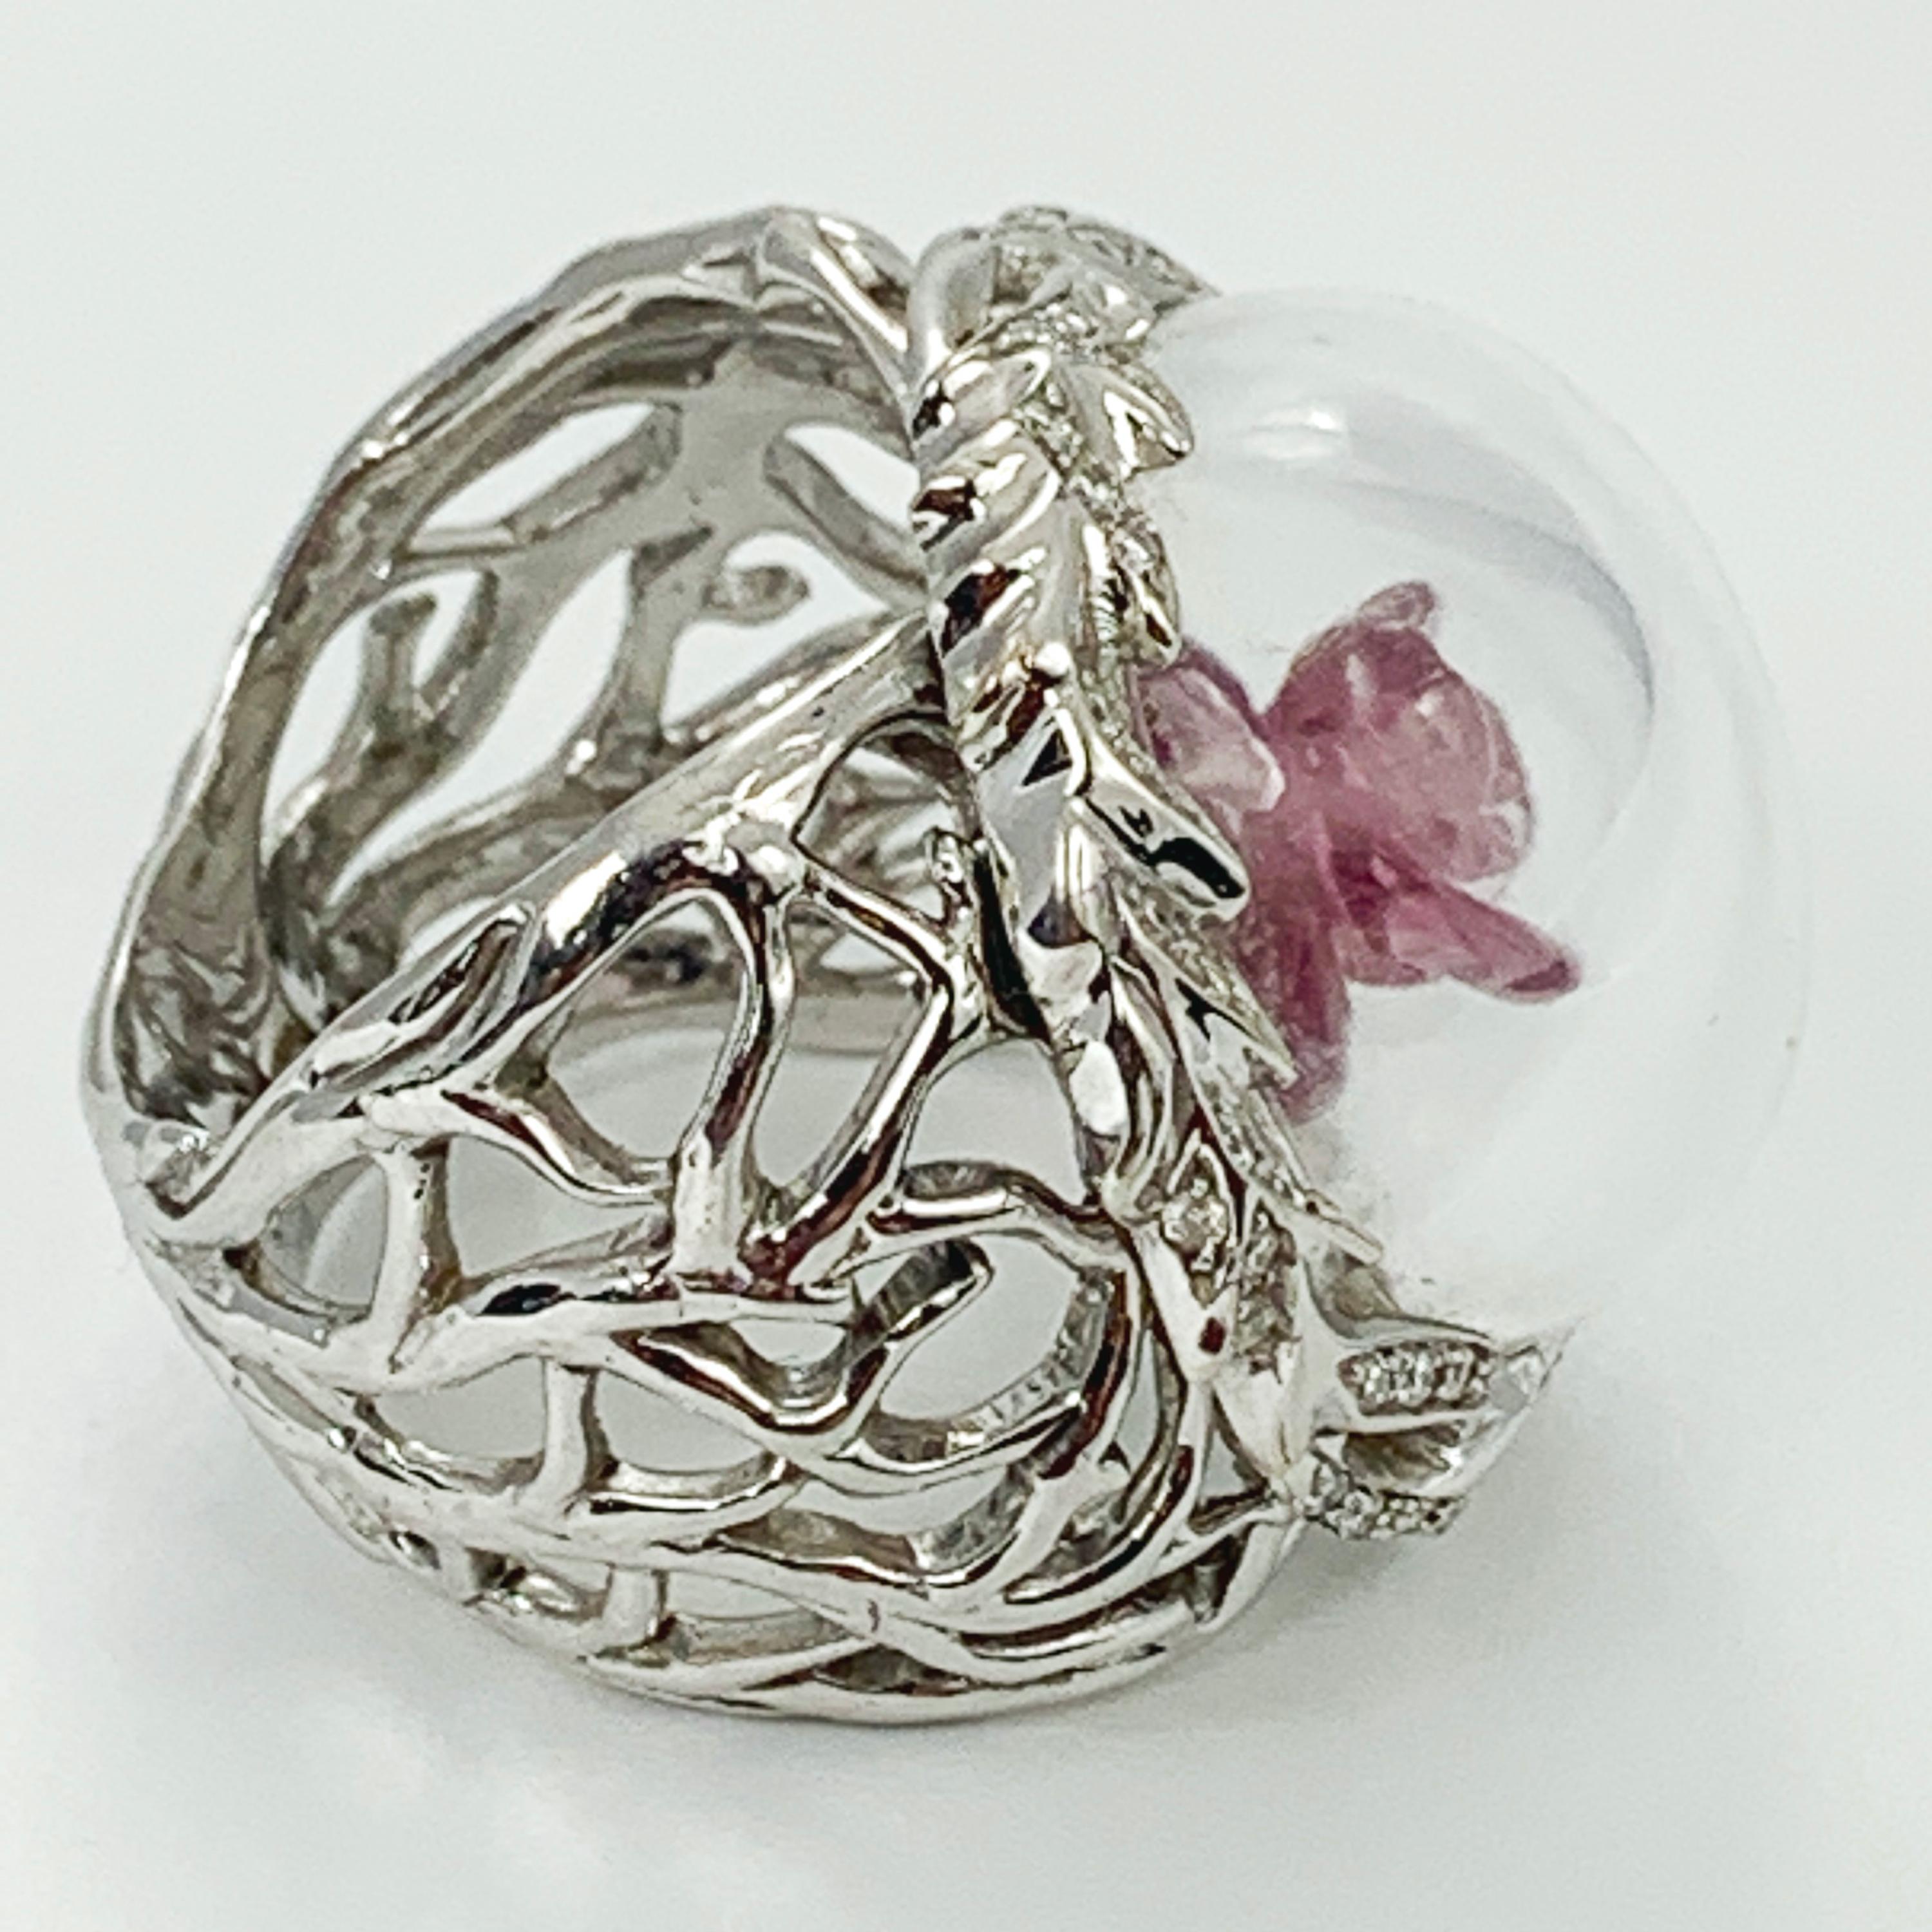 Mixed Cut Rubellite Rose in Rock Crystal Dome, Diamonds and 18K White Gold Ring by Édéenne For Sale